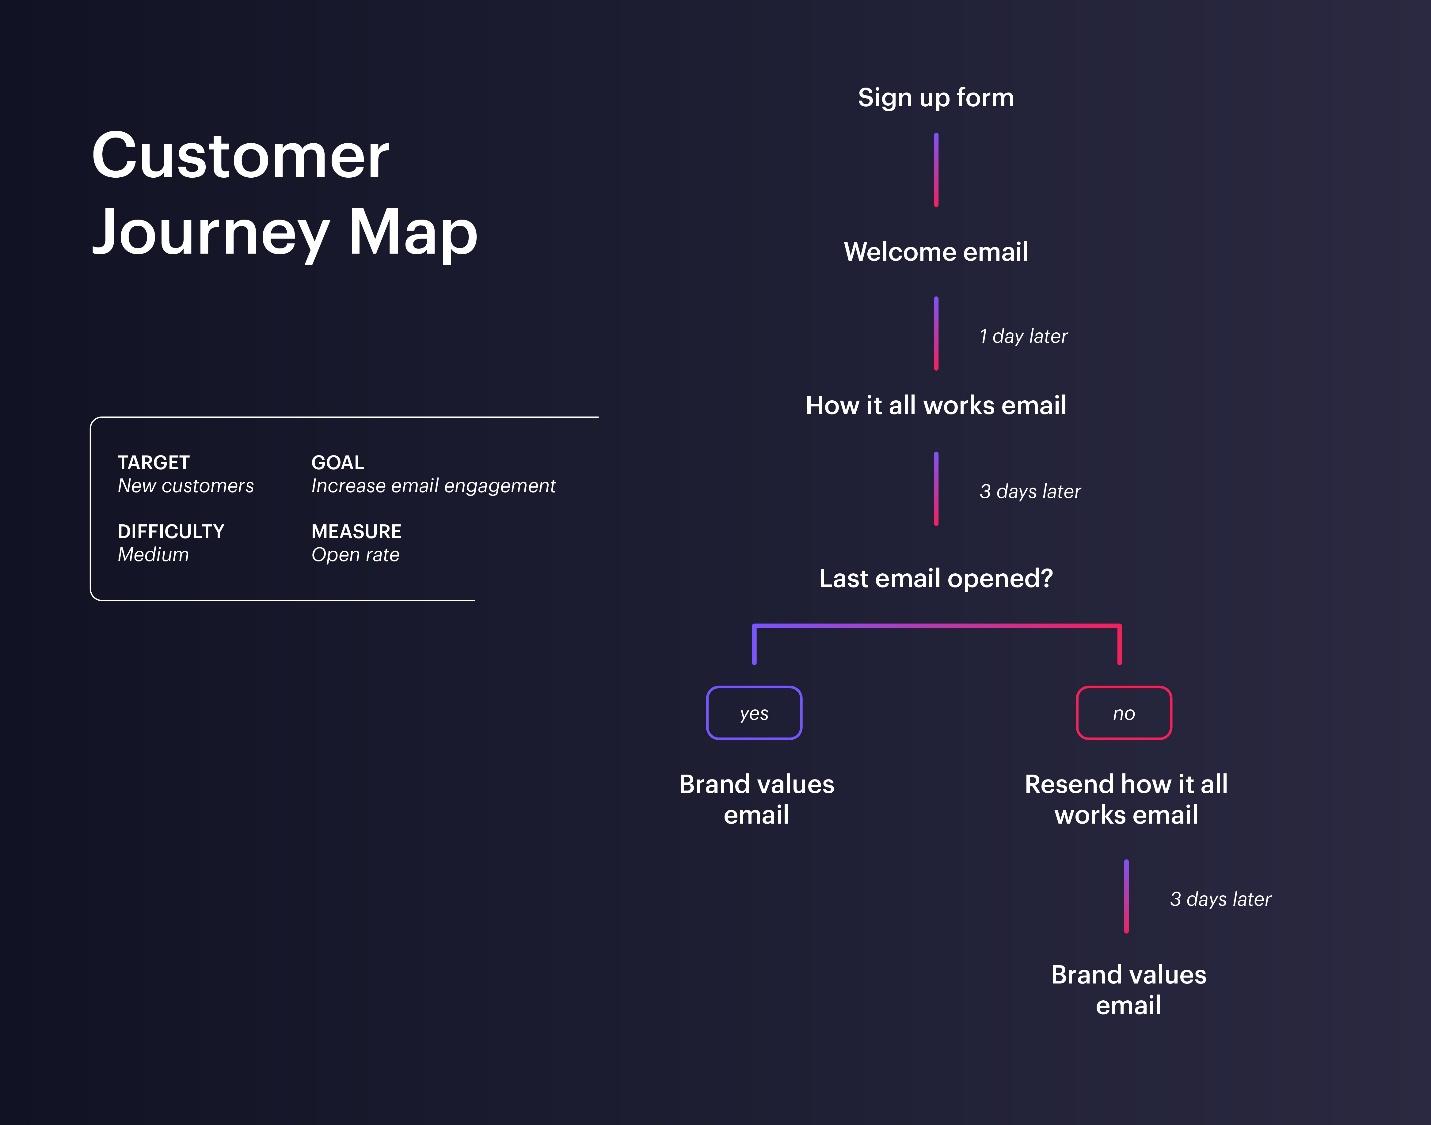 Customer mapping is another area that tends to be forgotten until a marketing team has a bit more experience.